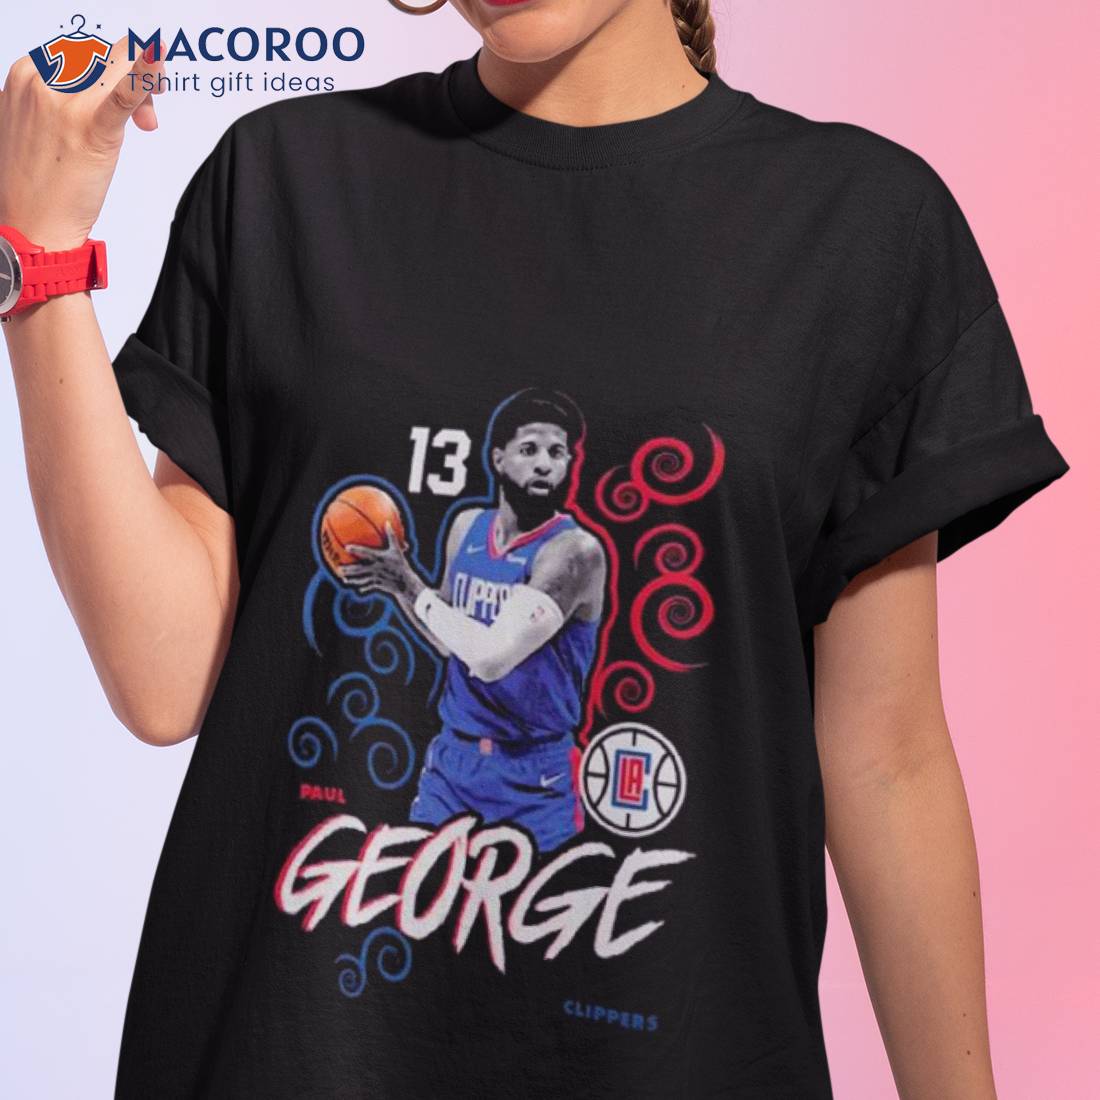 LA Clippers T-Shirts, Clippers T-Shirts